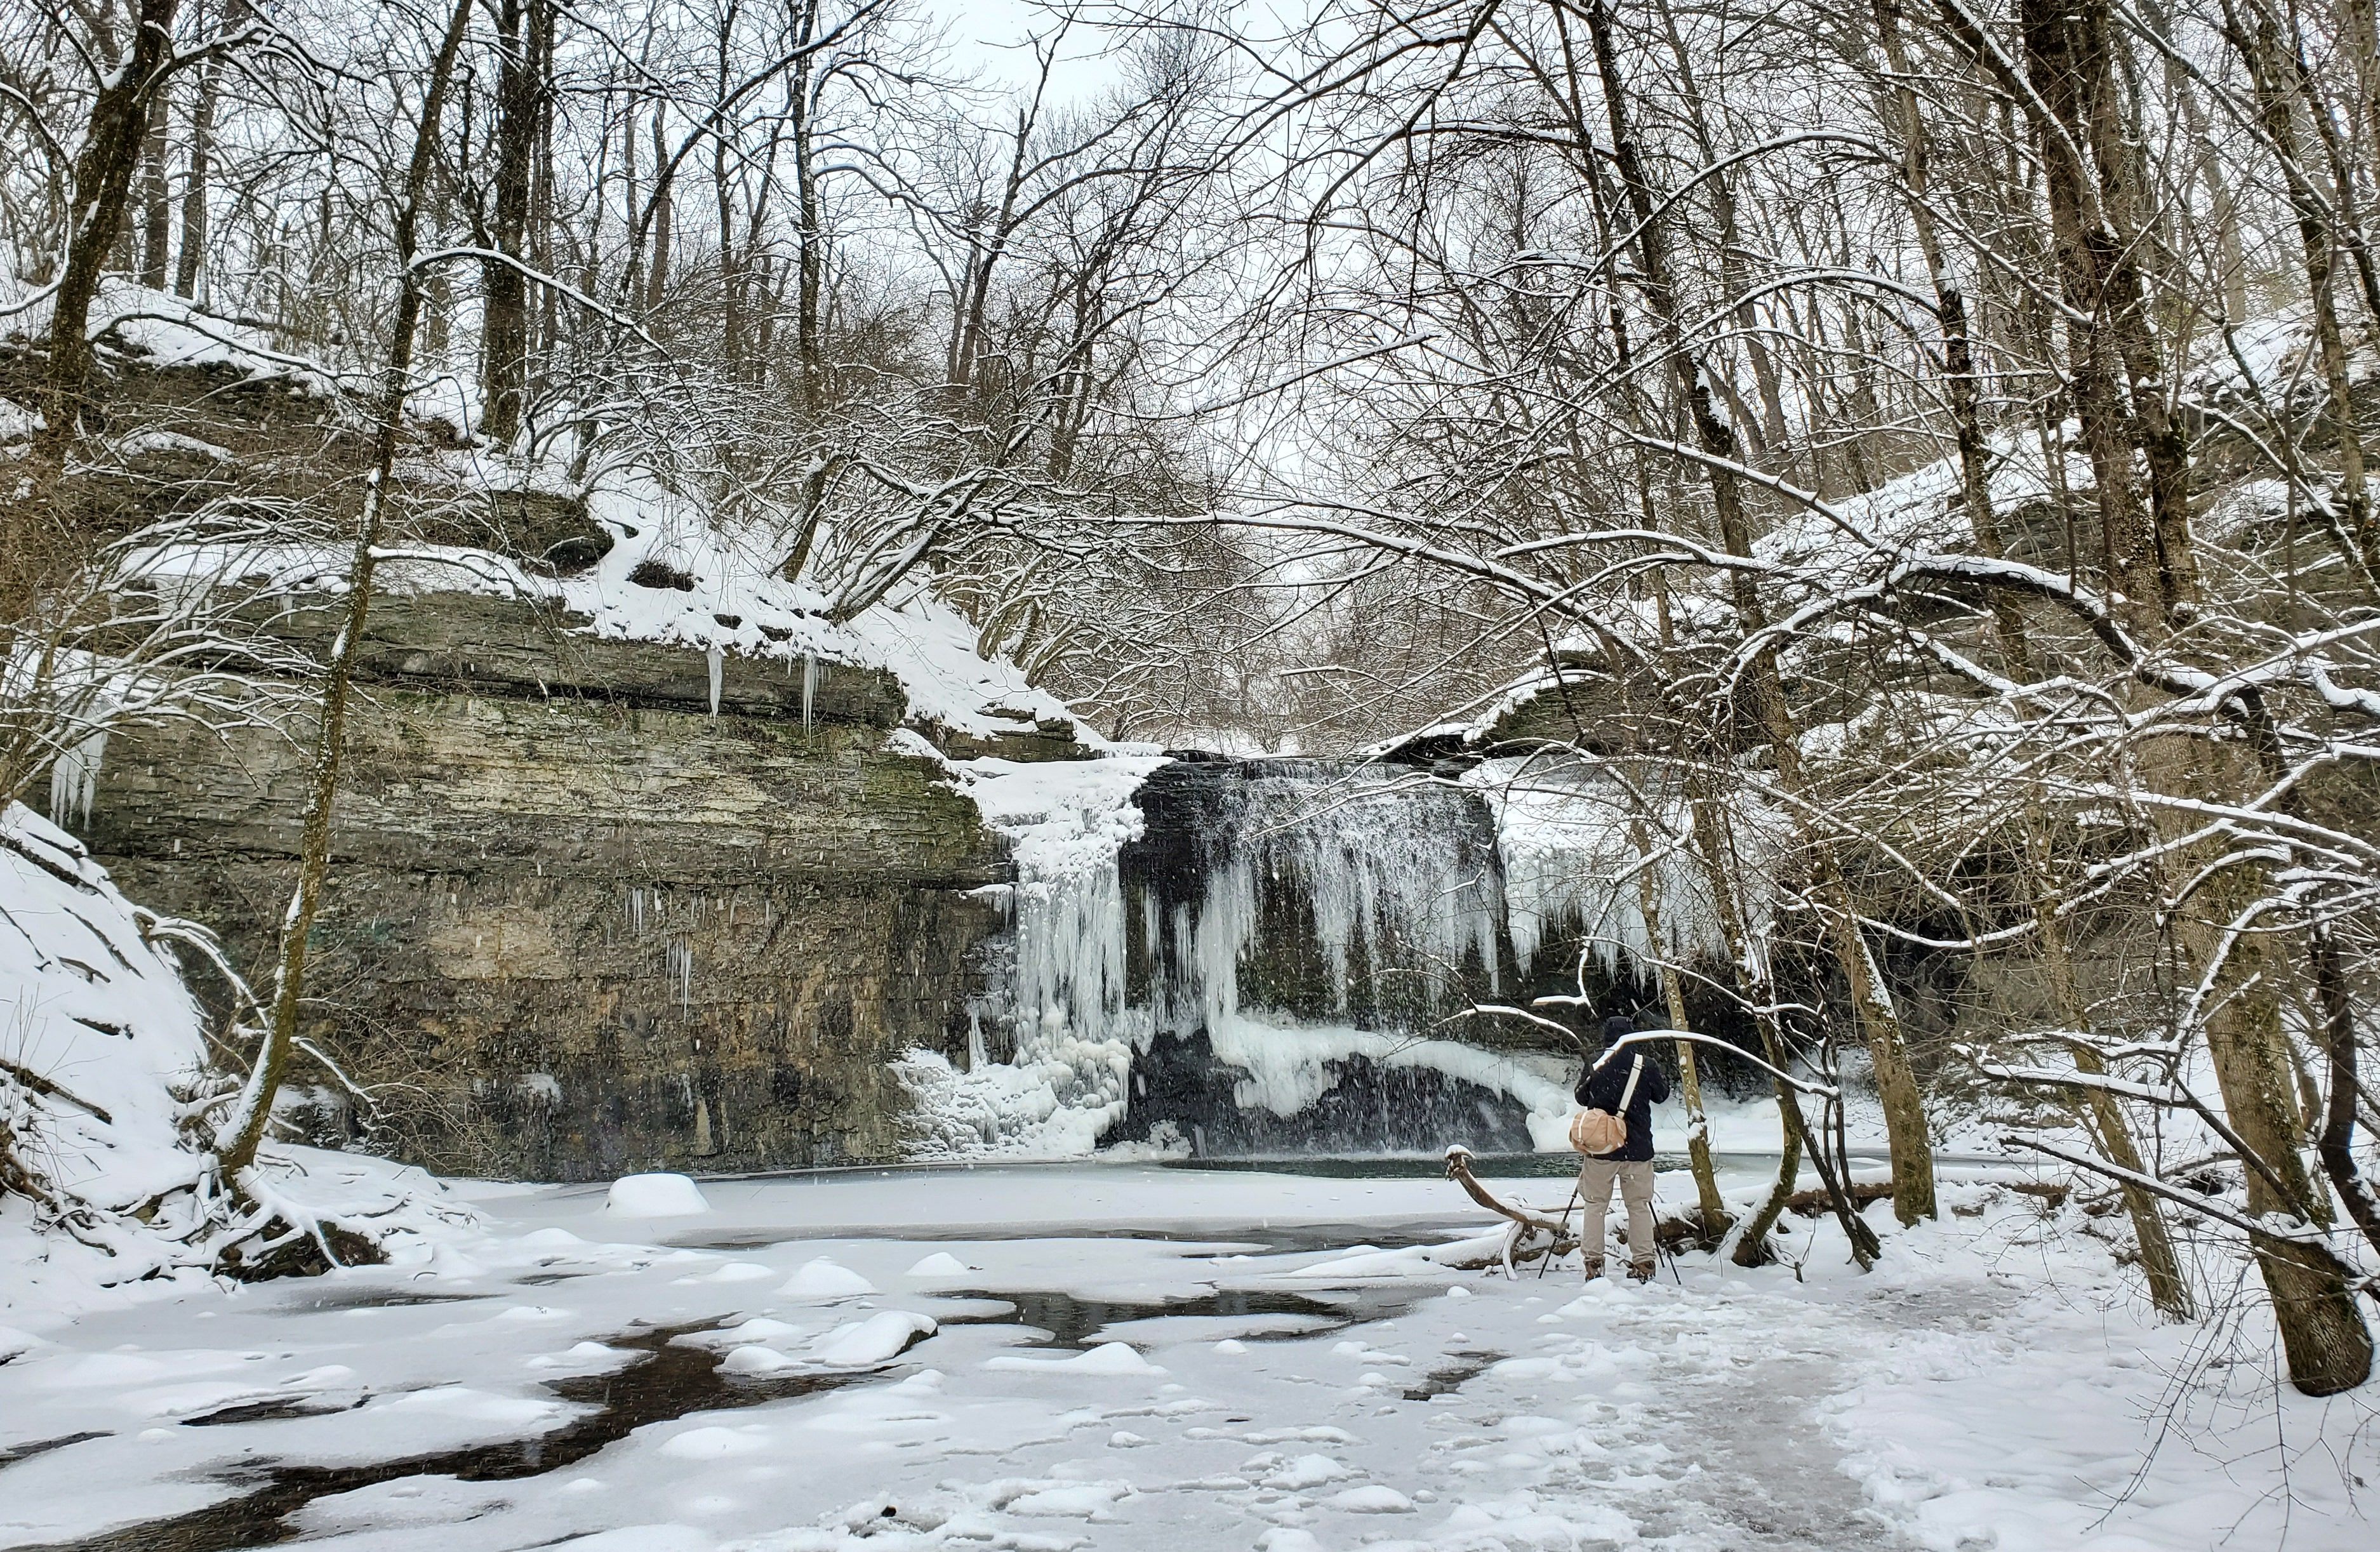 A photographer takes a picture of a frozen waterfall